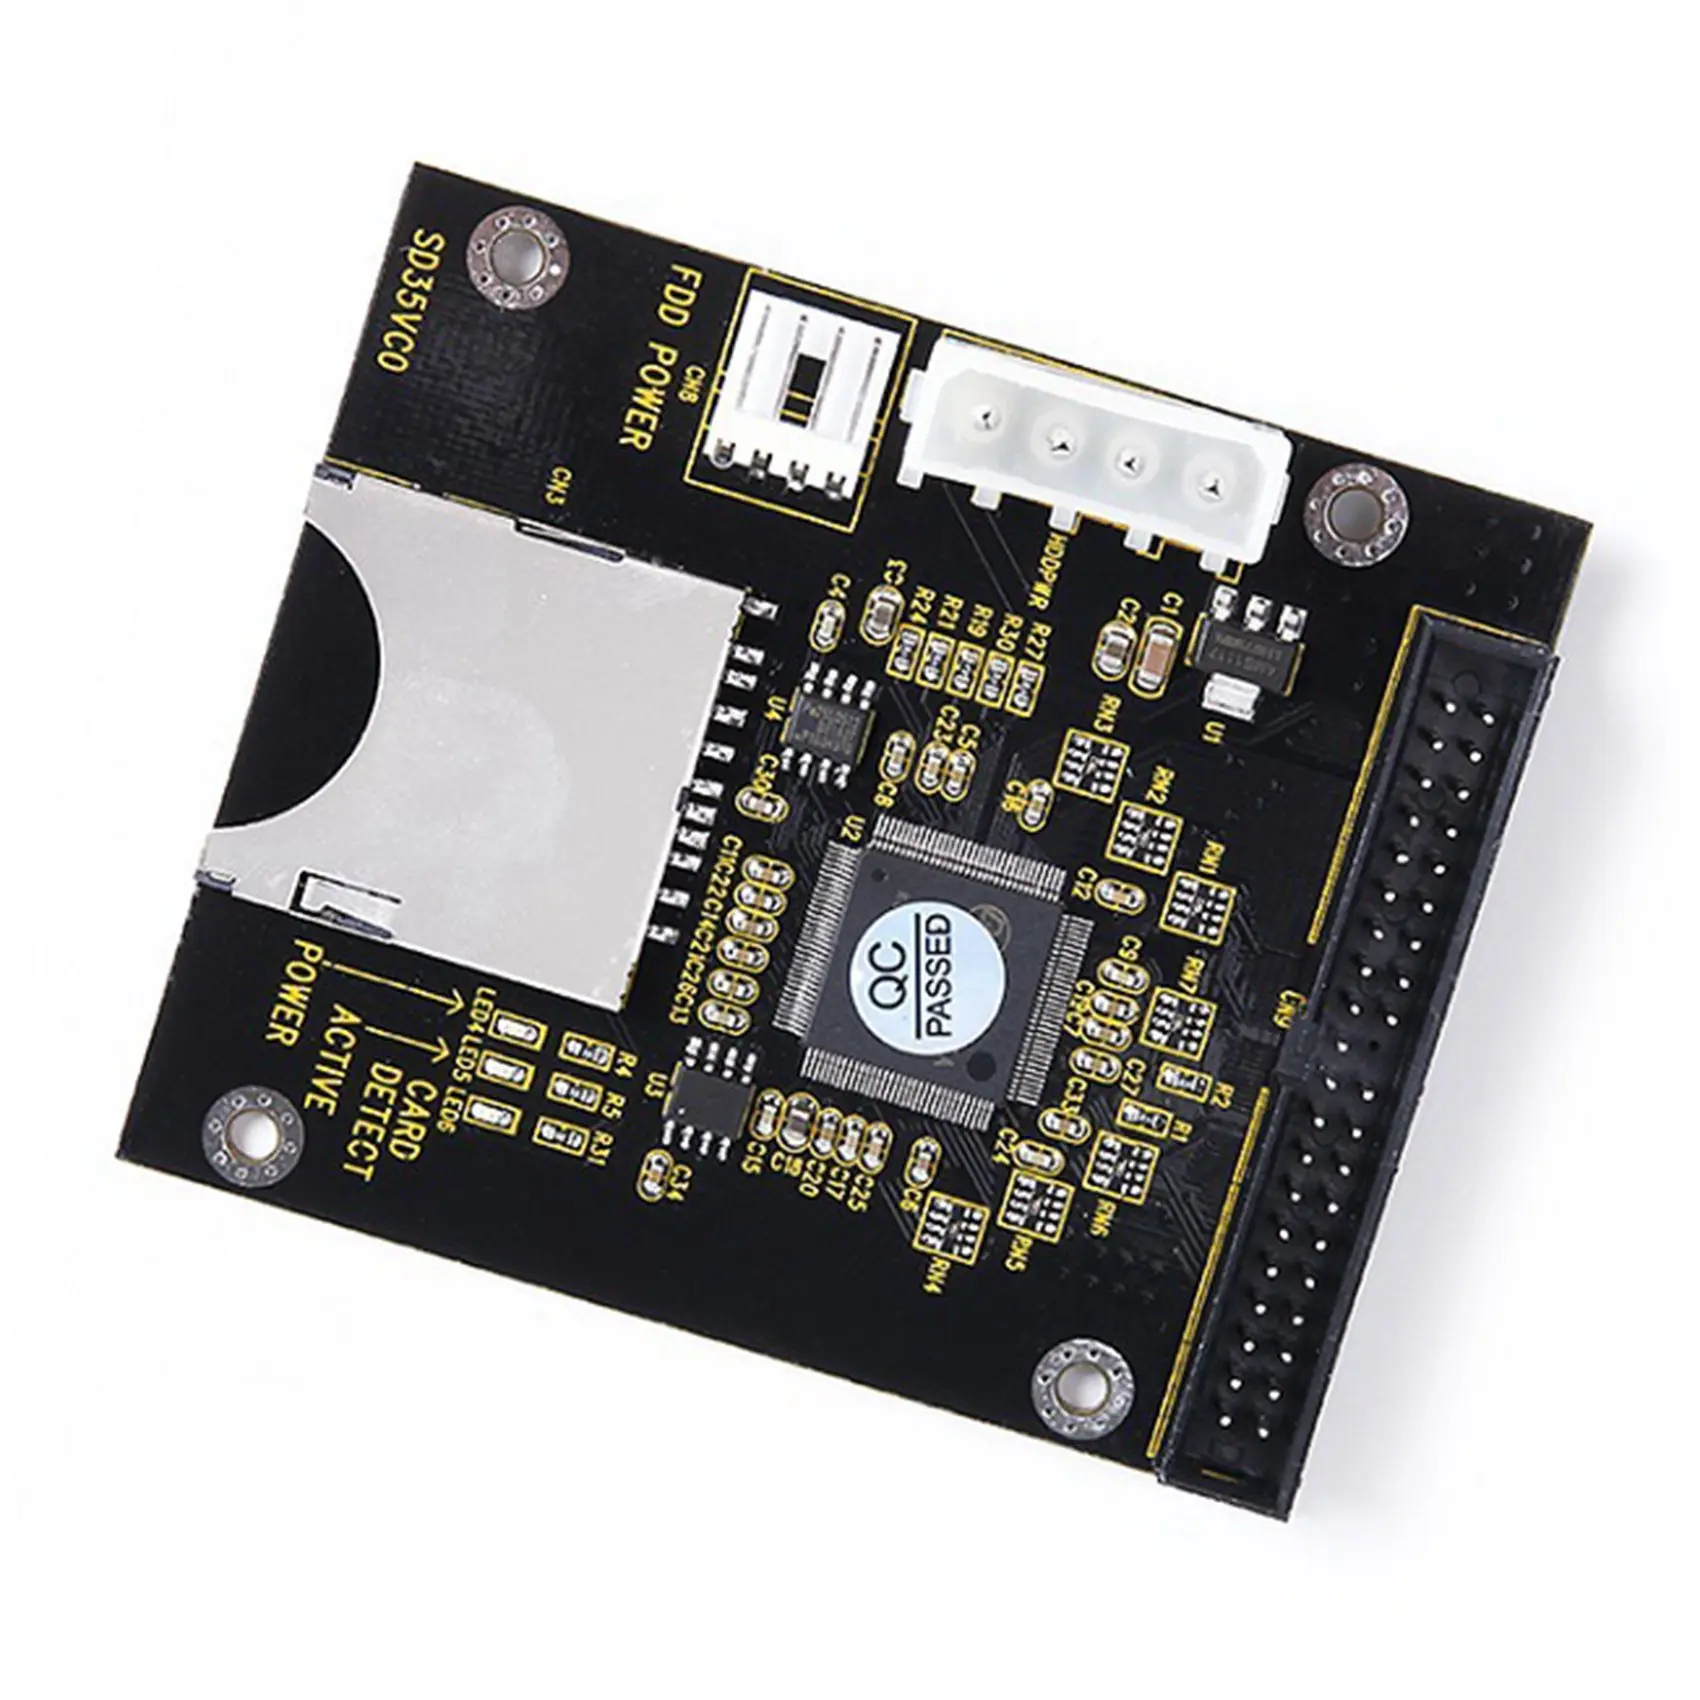 Карта конвертера SD на 3,5 дюйма IDE 40 Pin IDE SD Card Adapter SSD Embedded Storage Adapter Card IDE Expansion Card 0